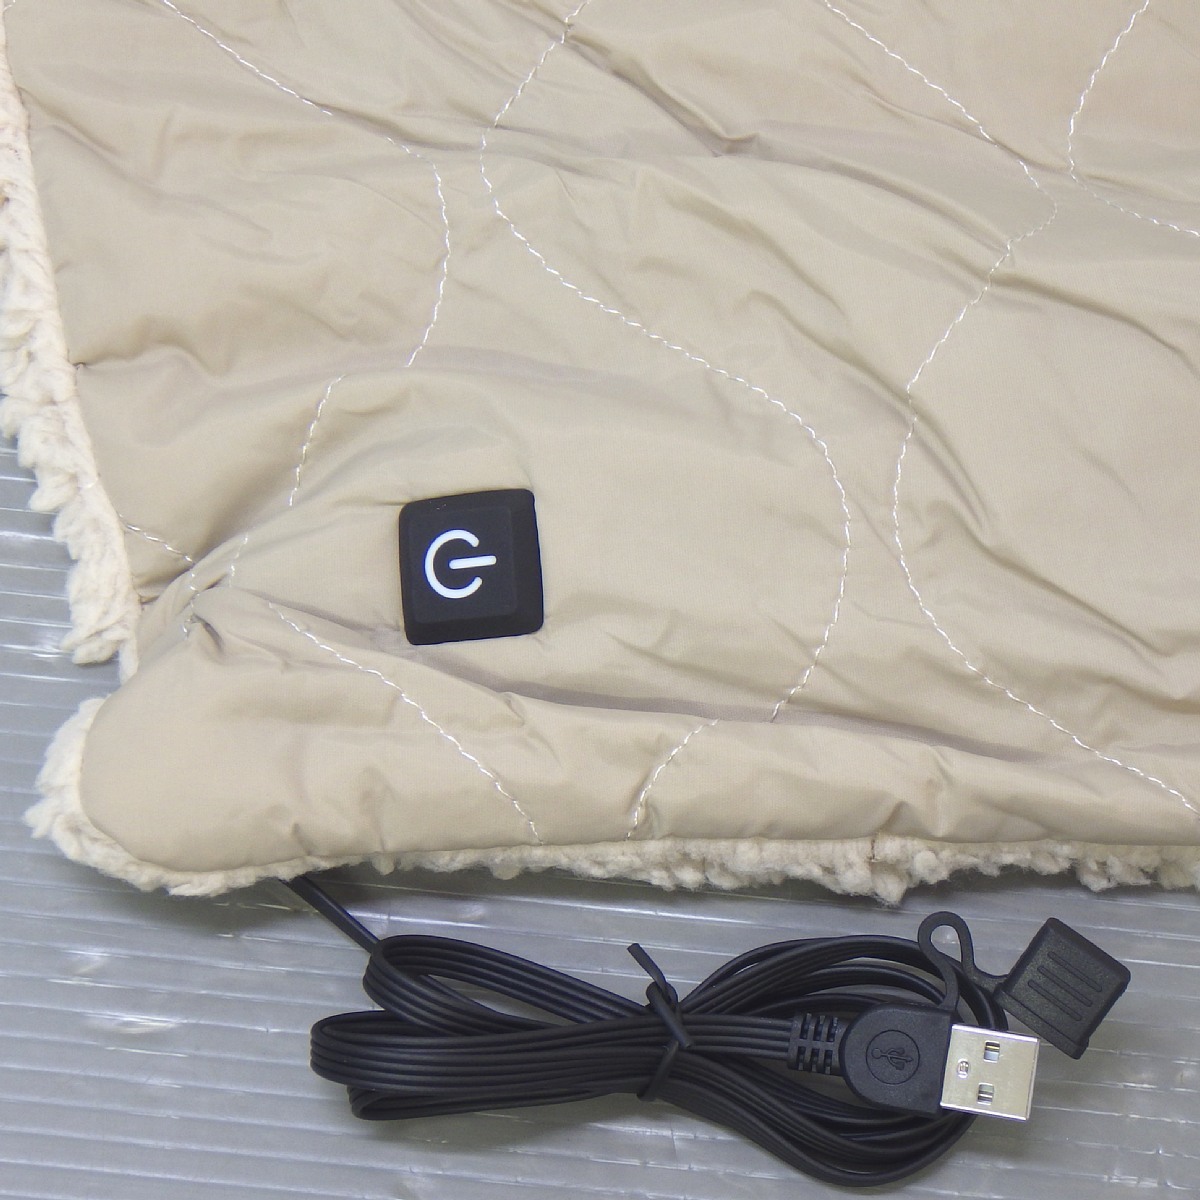  package damage Yuasa USB supply of electricity electric heating heater attaching portable electric blanket YCB-CU25C beige 90cm×60cm lap blanket 